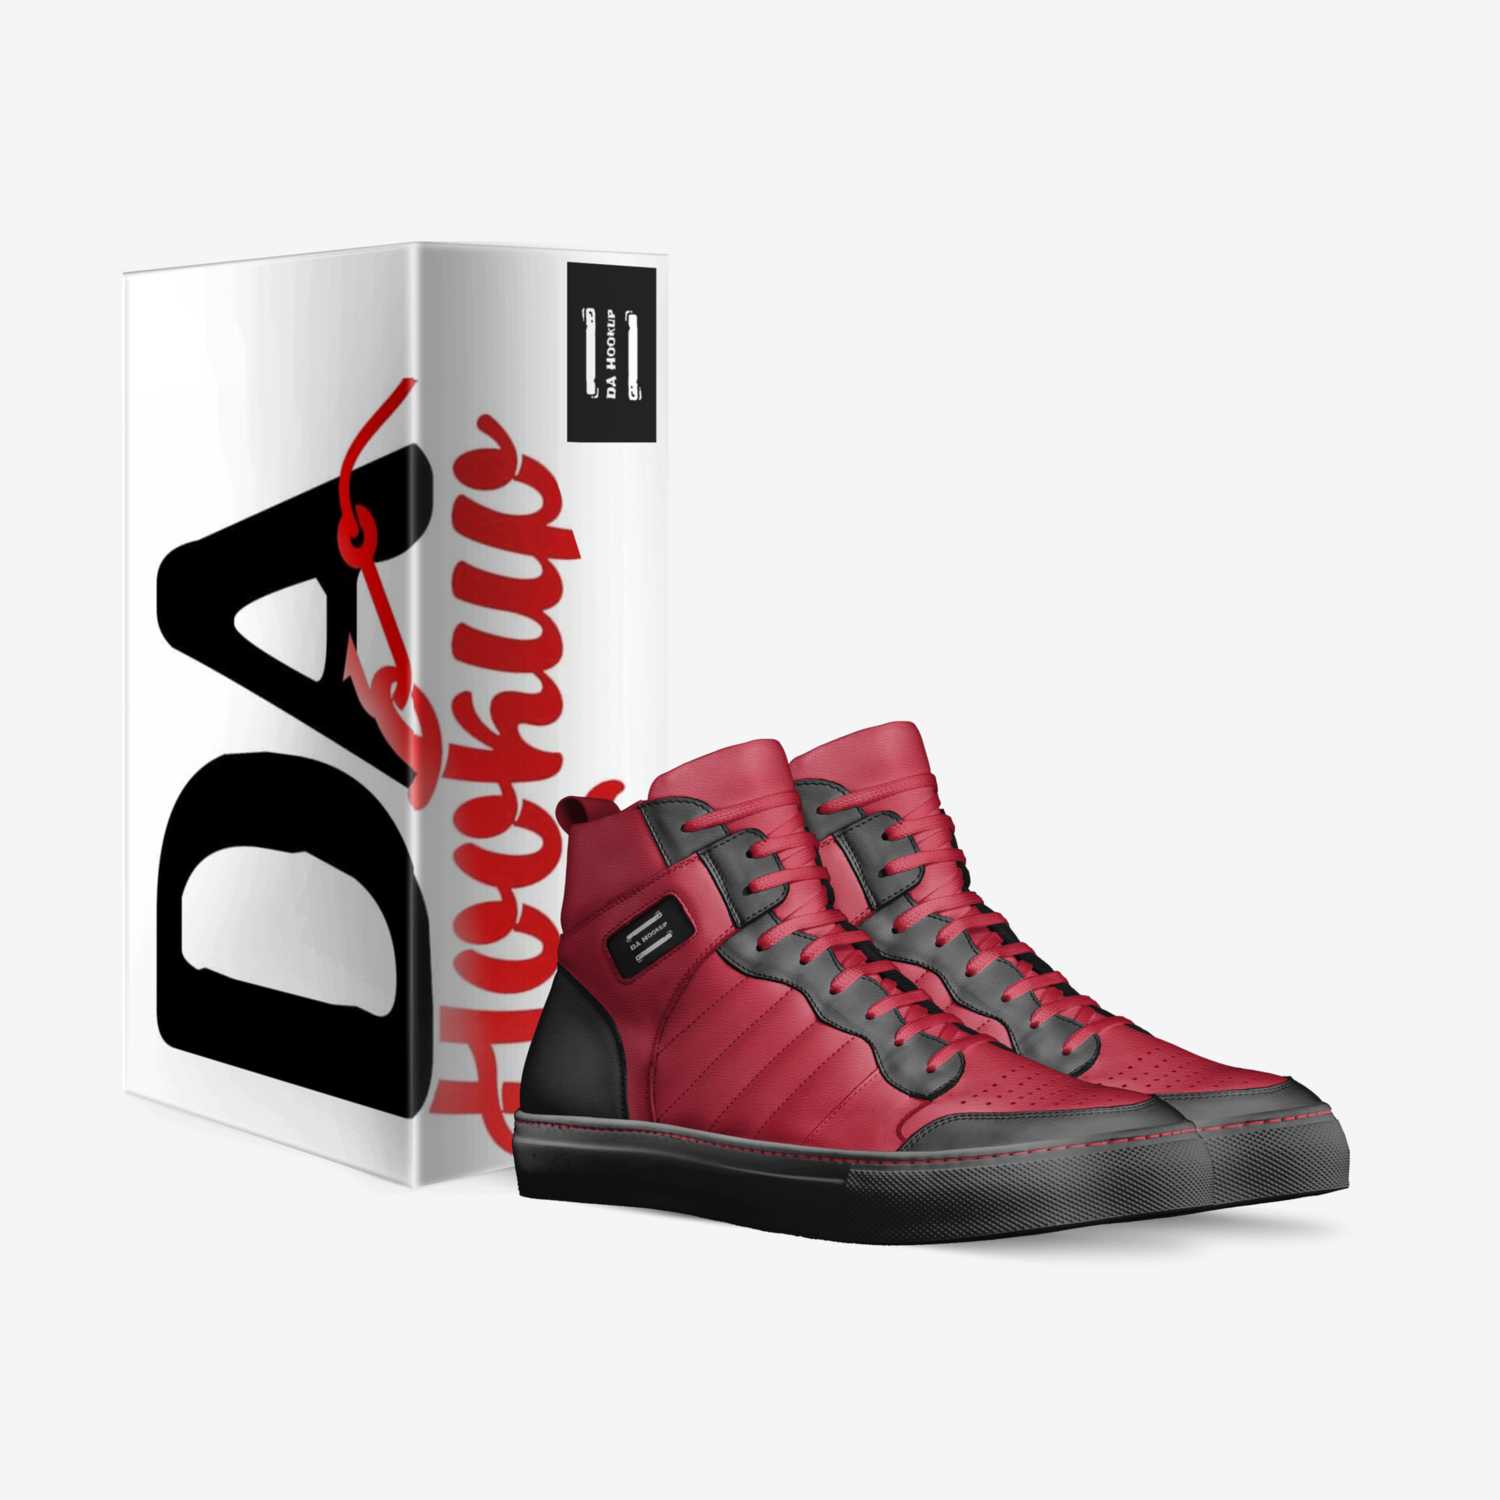 DA Hookup custom made in Italy shoes by Tristin Ferrand | Box view